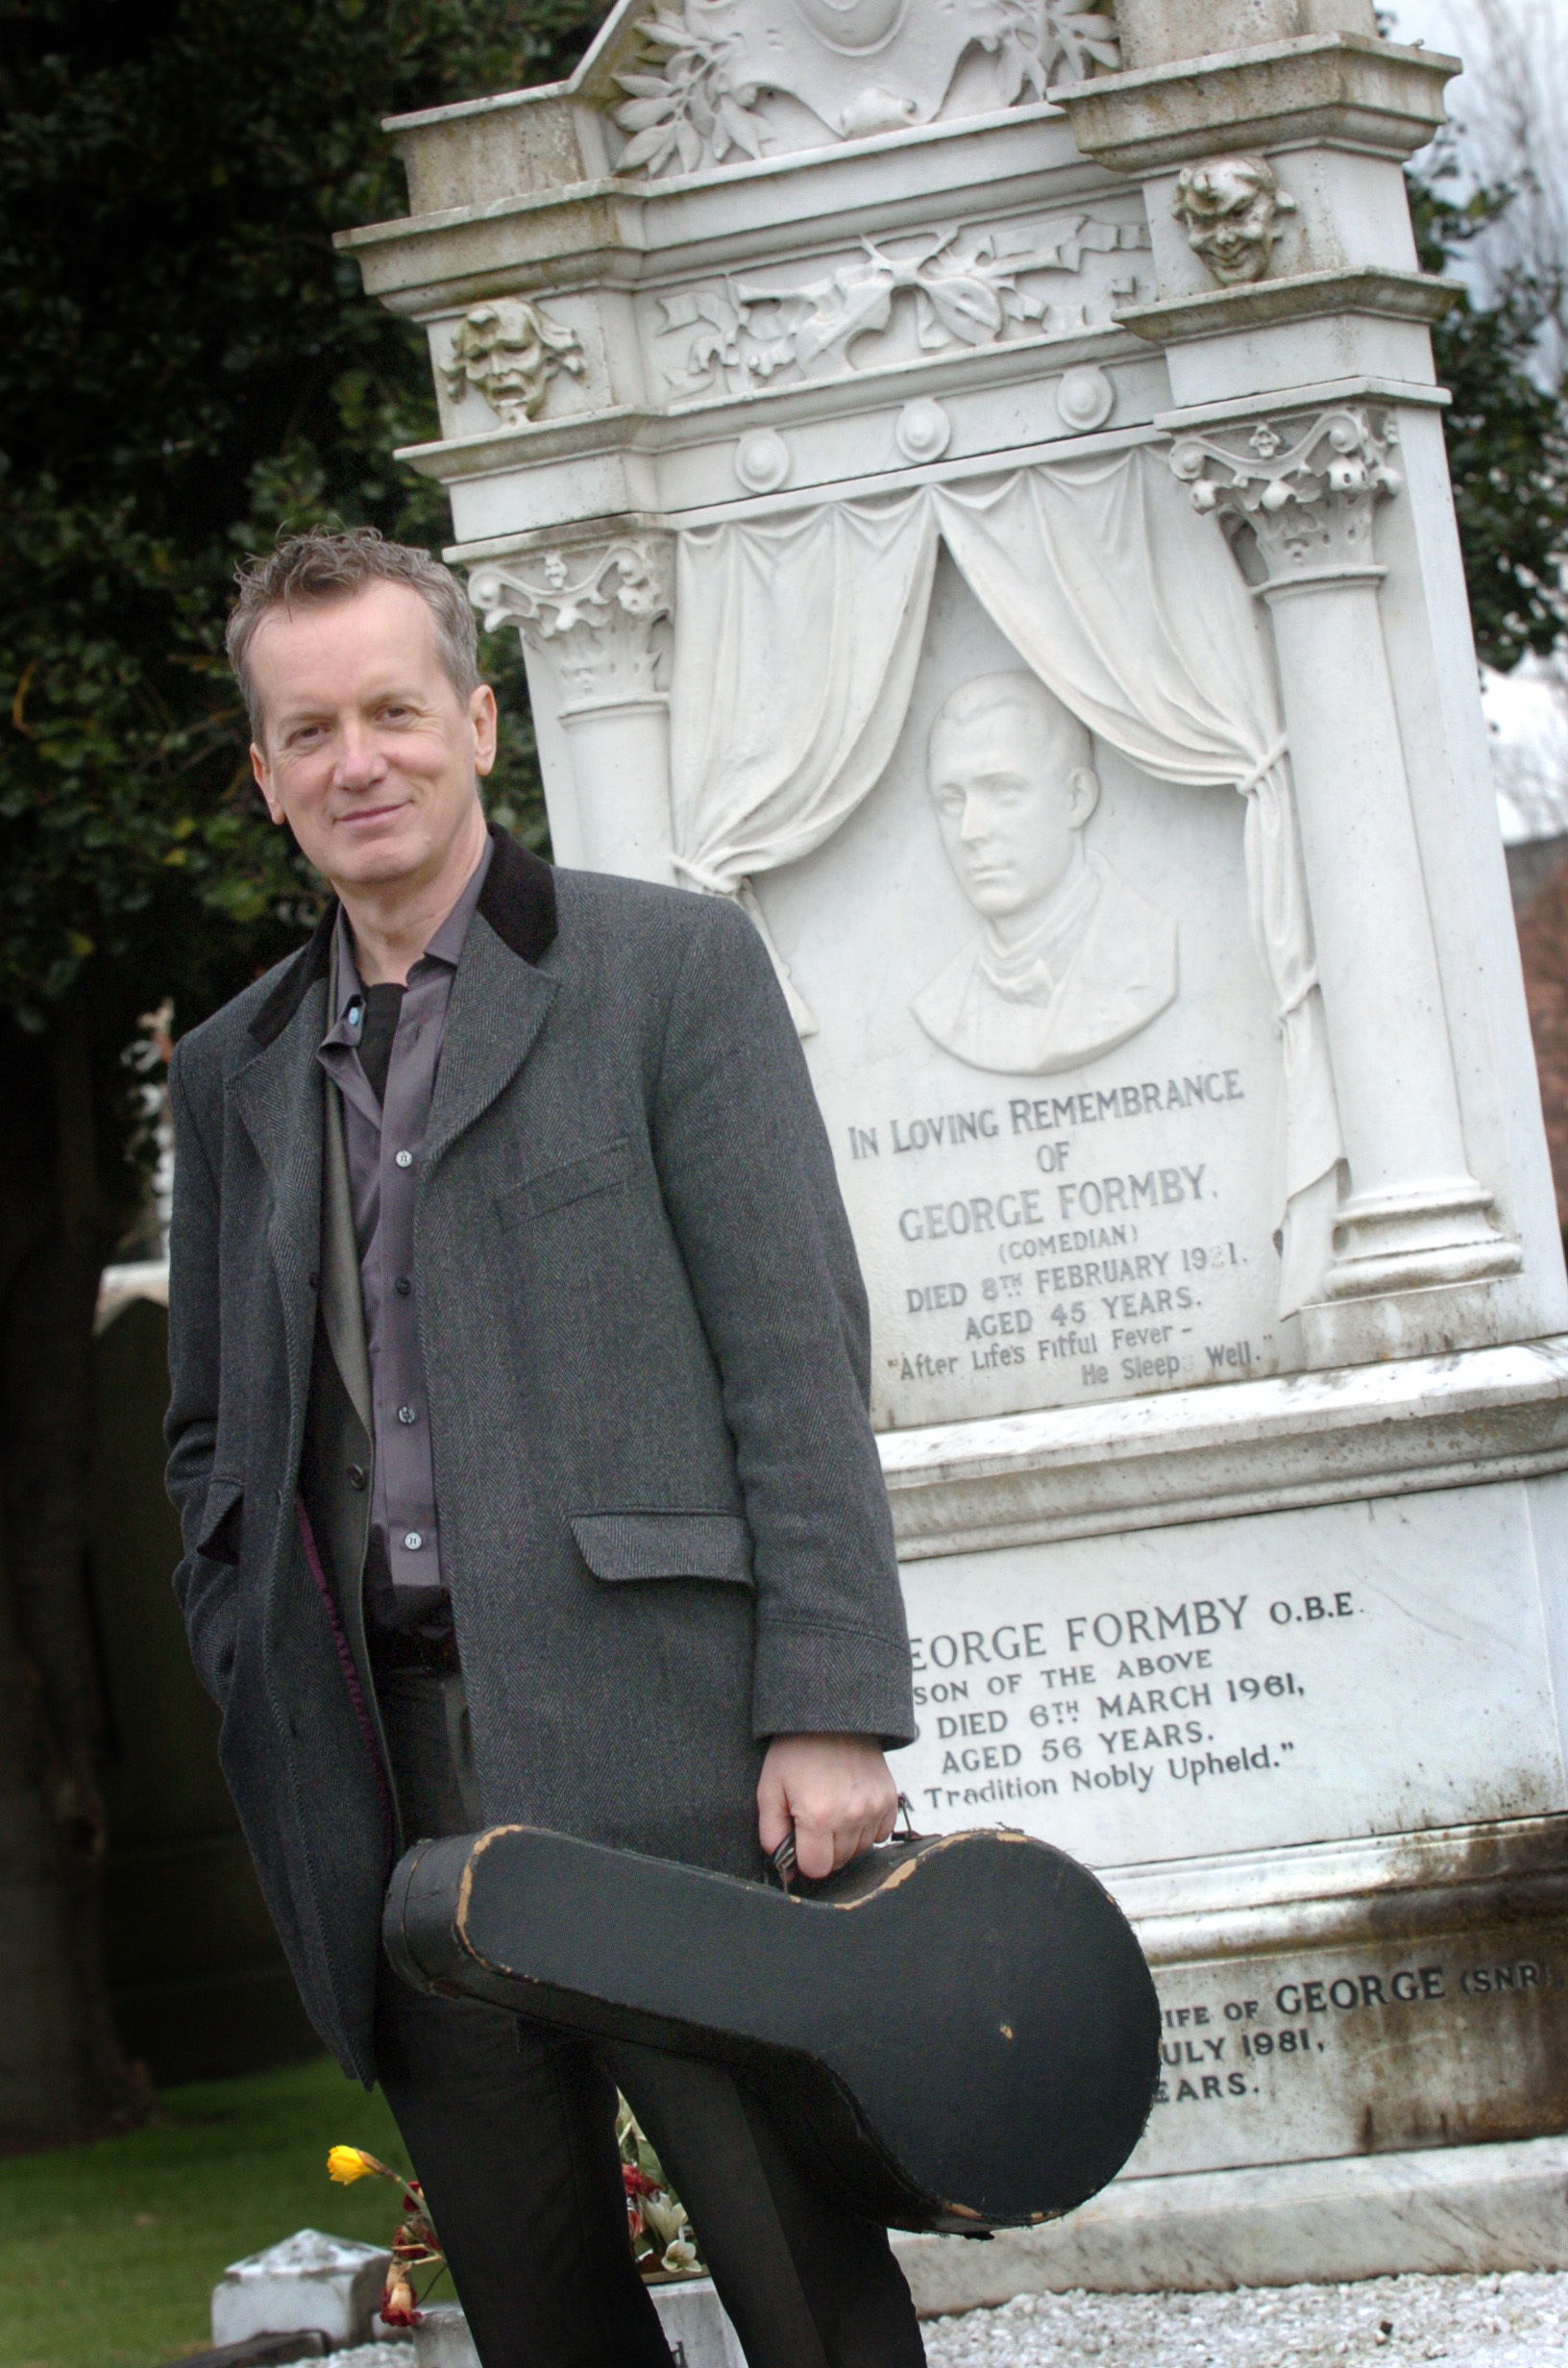 Frank Skinner was a fan and filmed a BBC documentary on his life